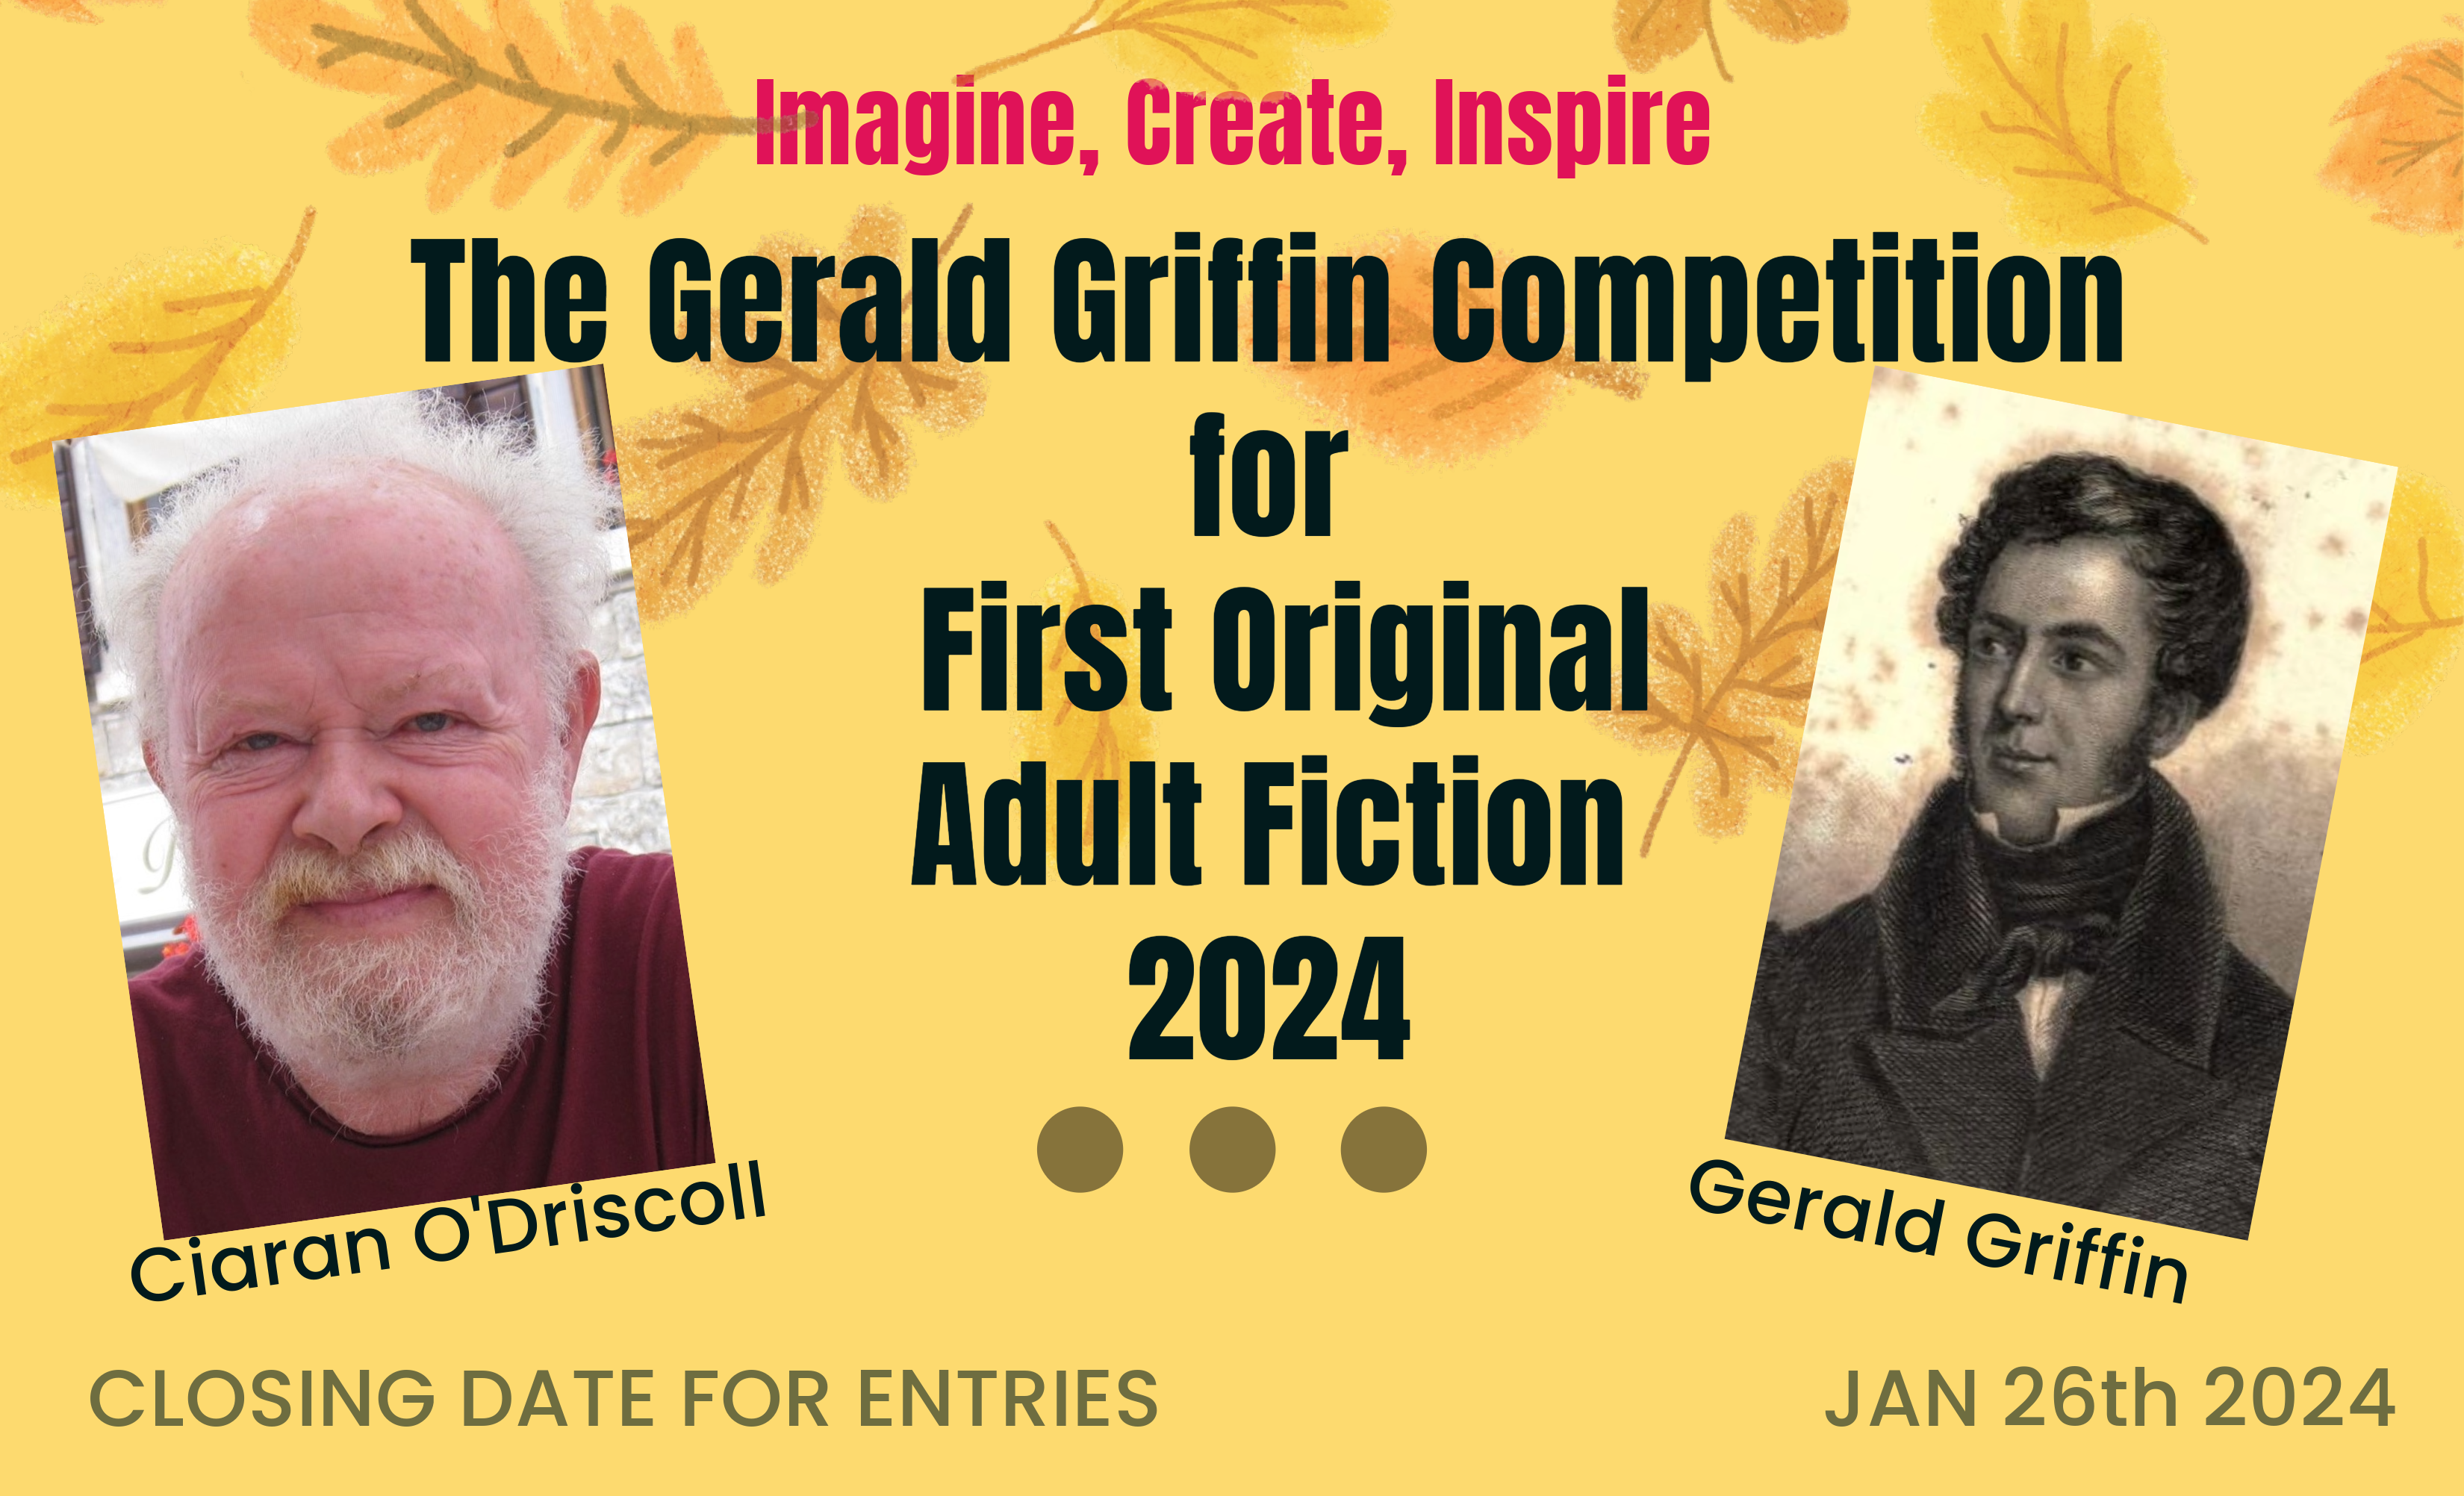 Gerald Griffin Competition for First Original Adult Fiction 2024 has been launched